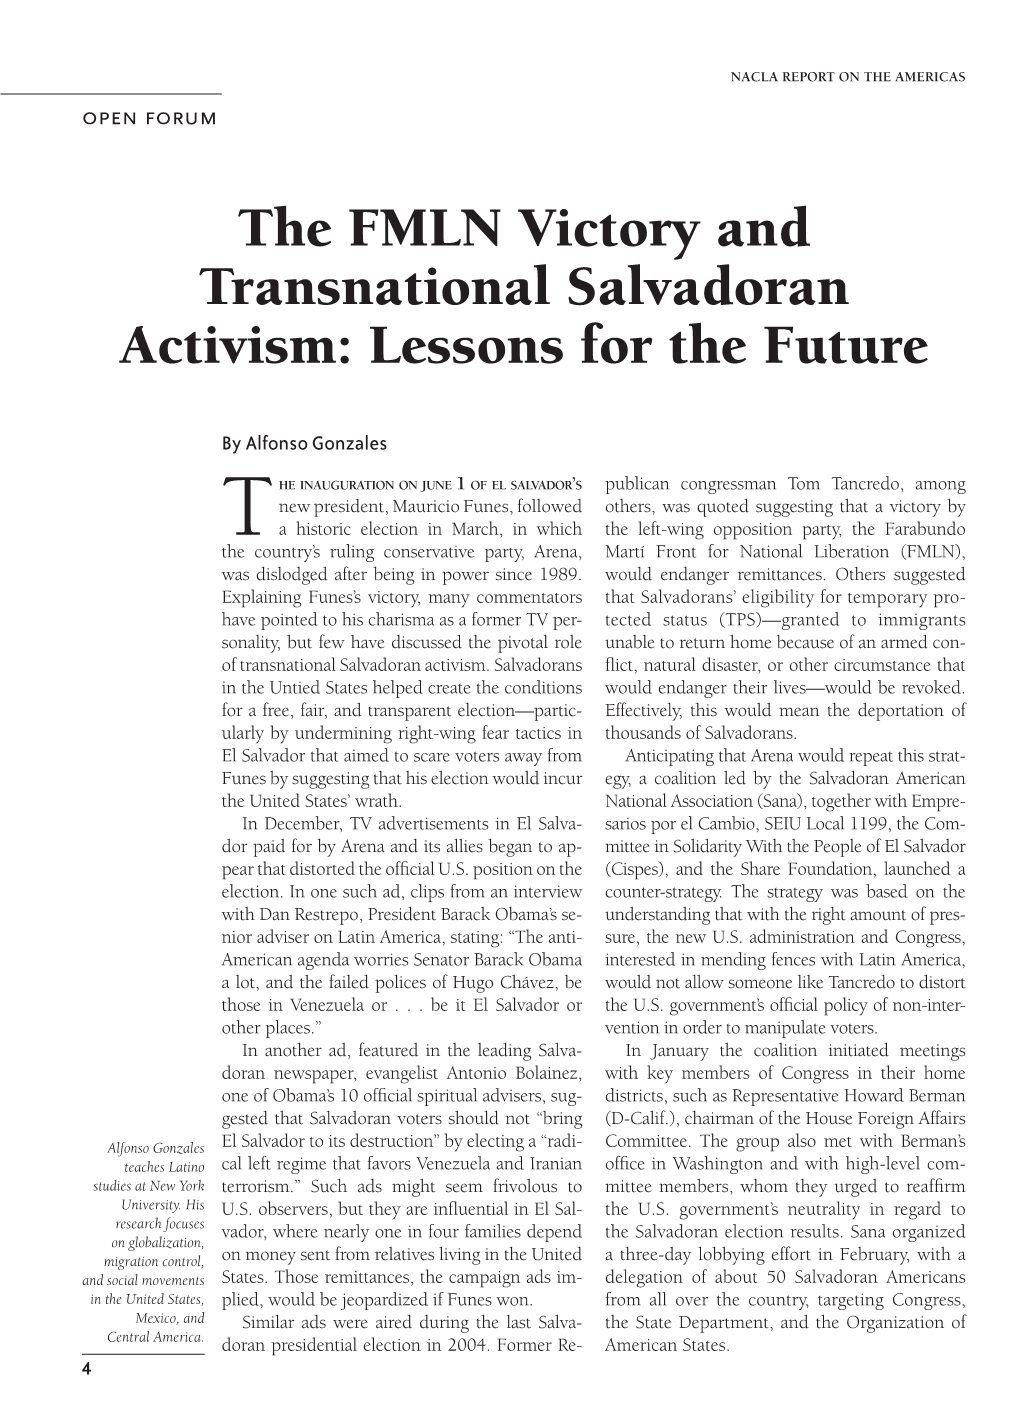 The FMLN Victory and Transnational Salvadoran Activism: Lessons for the Future